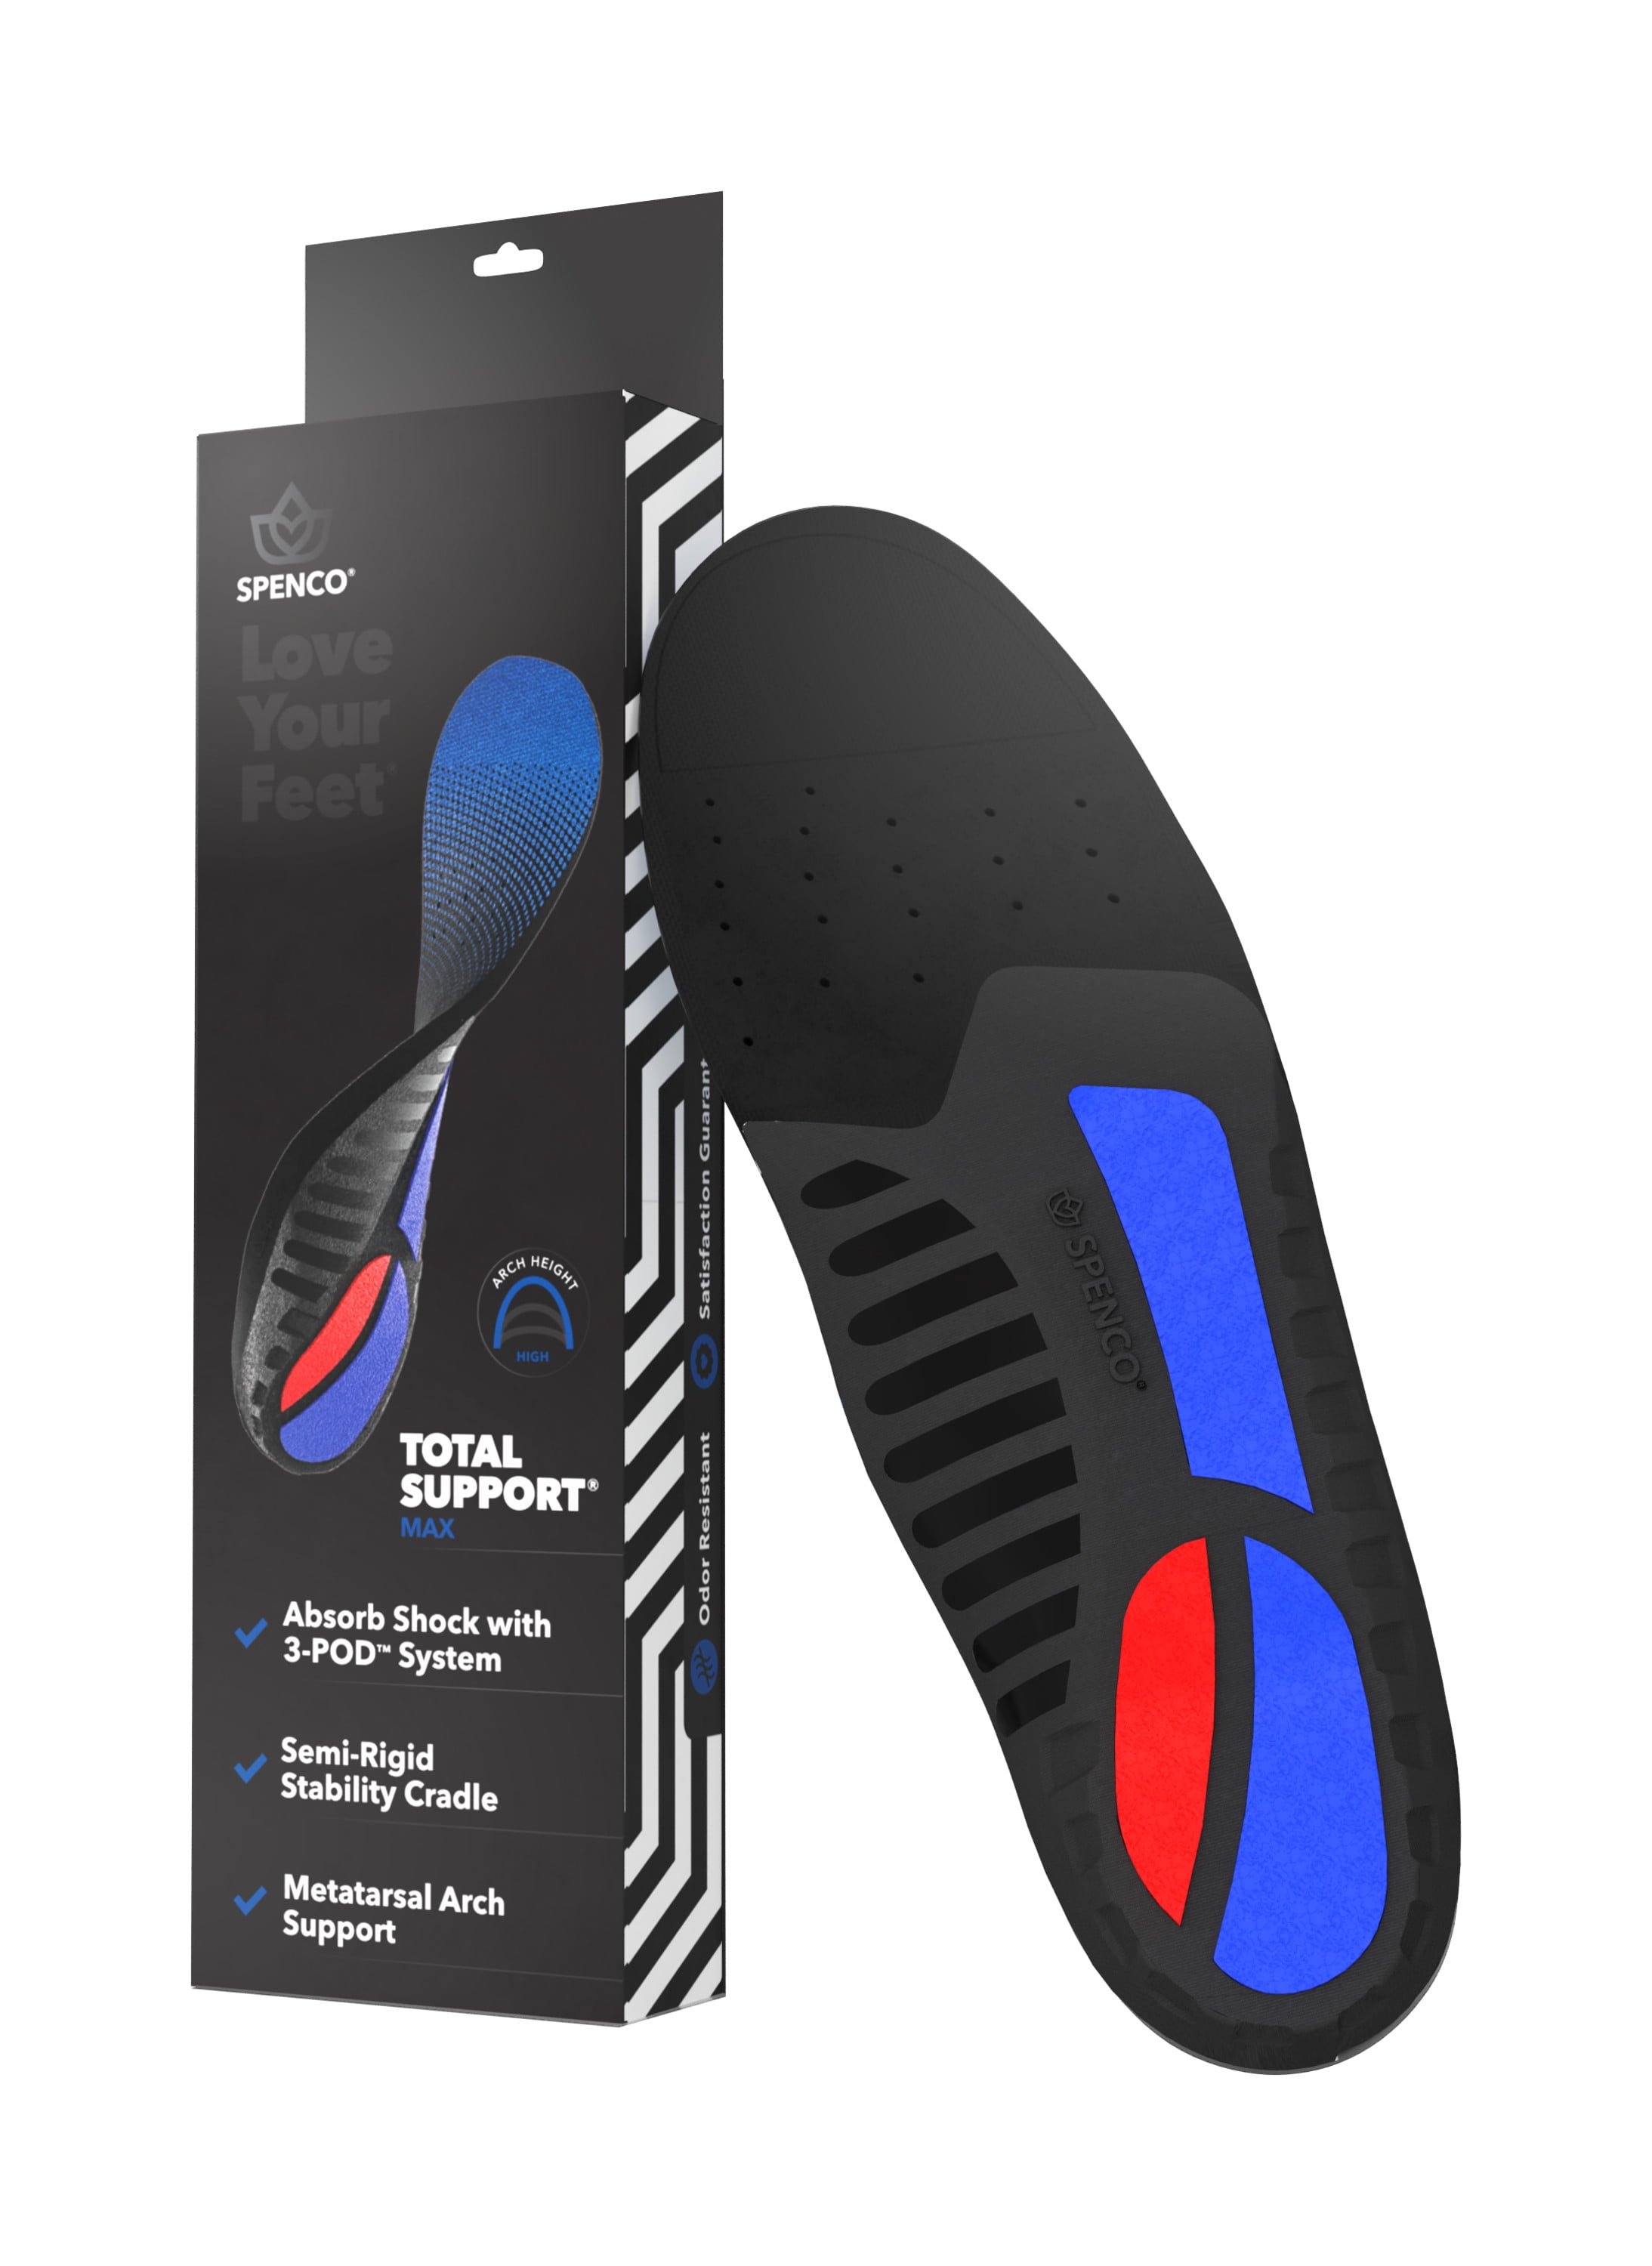 Spenco Total Support insole uni absorbs shock arch support cushioning1 pair 